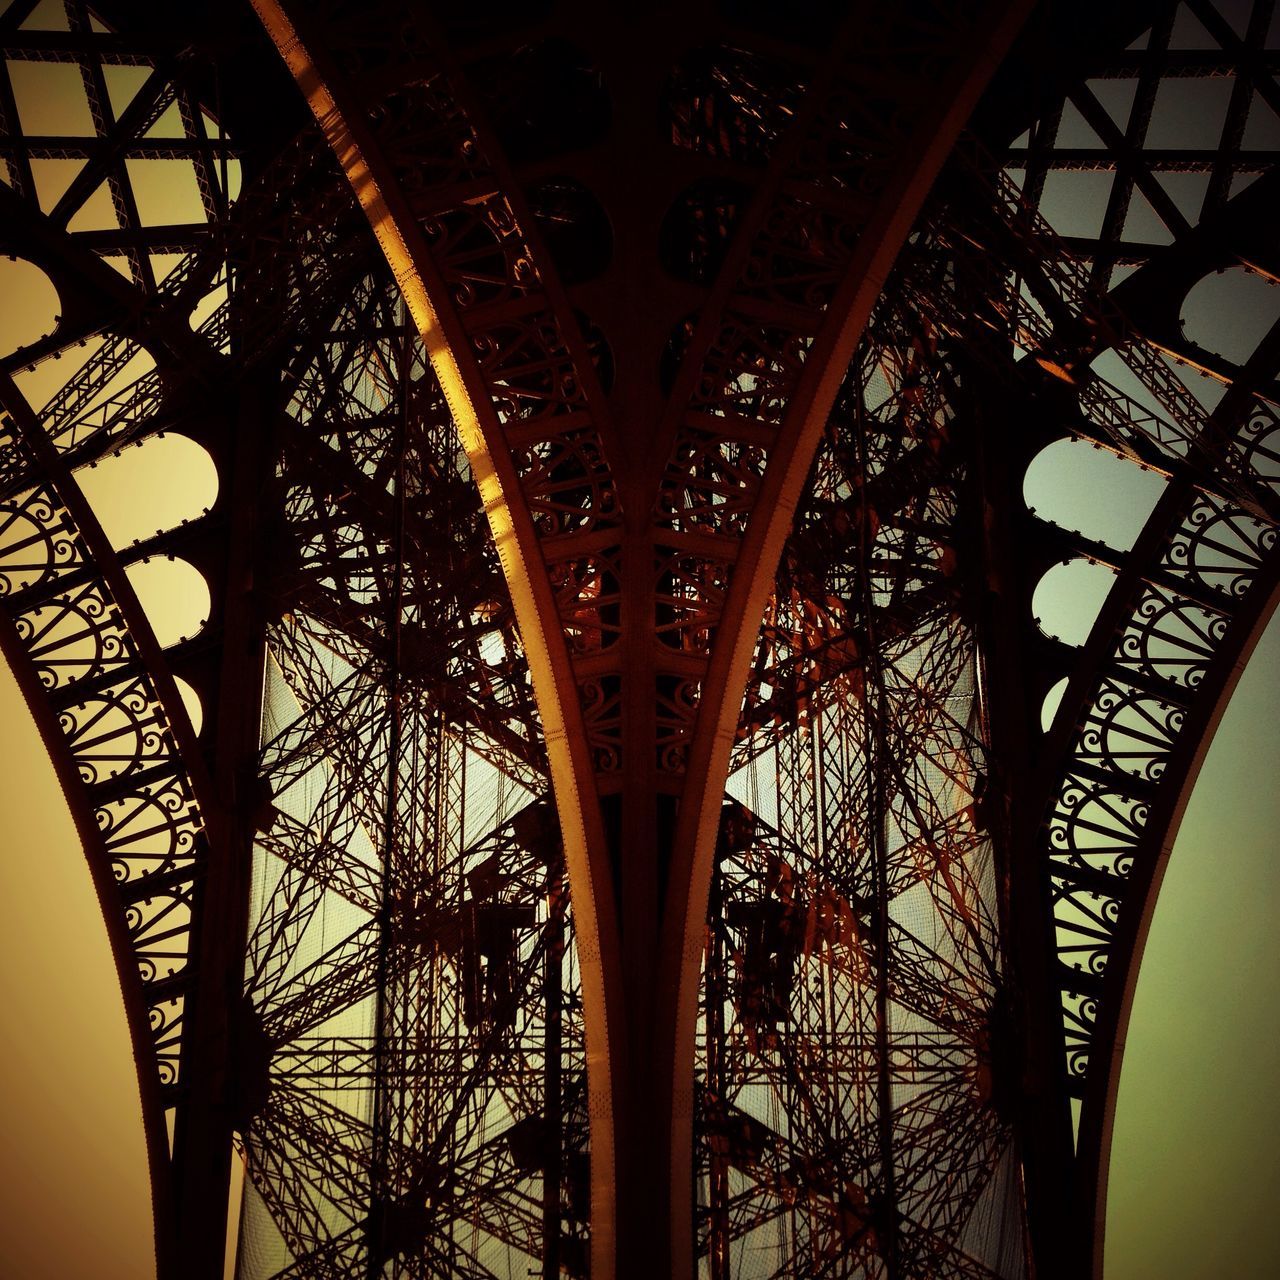 built structure, architecture, low angle view, connection, bridge - man made structure, metal, sky, arch, engineering, indoors, tree, no people, famous place, travel destinations, day, silhouette, architectural feature, international landmark, culture